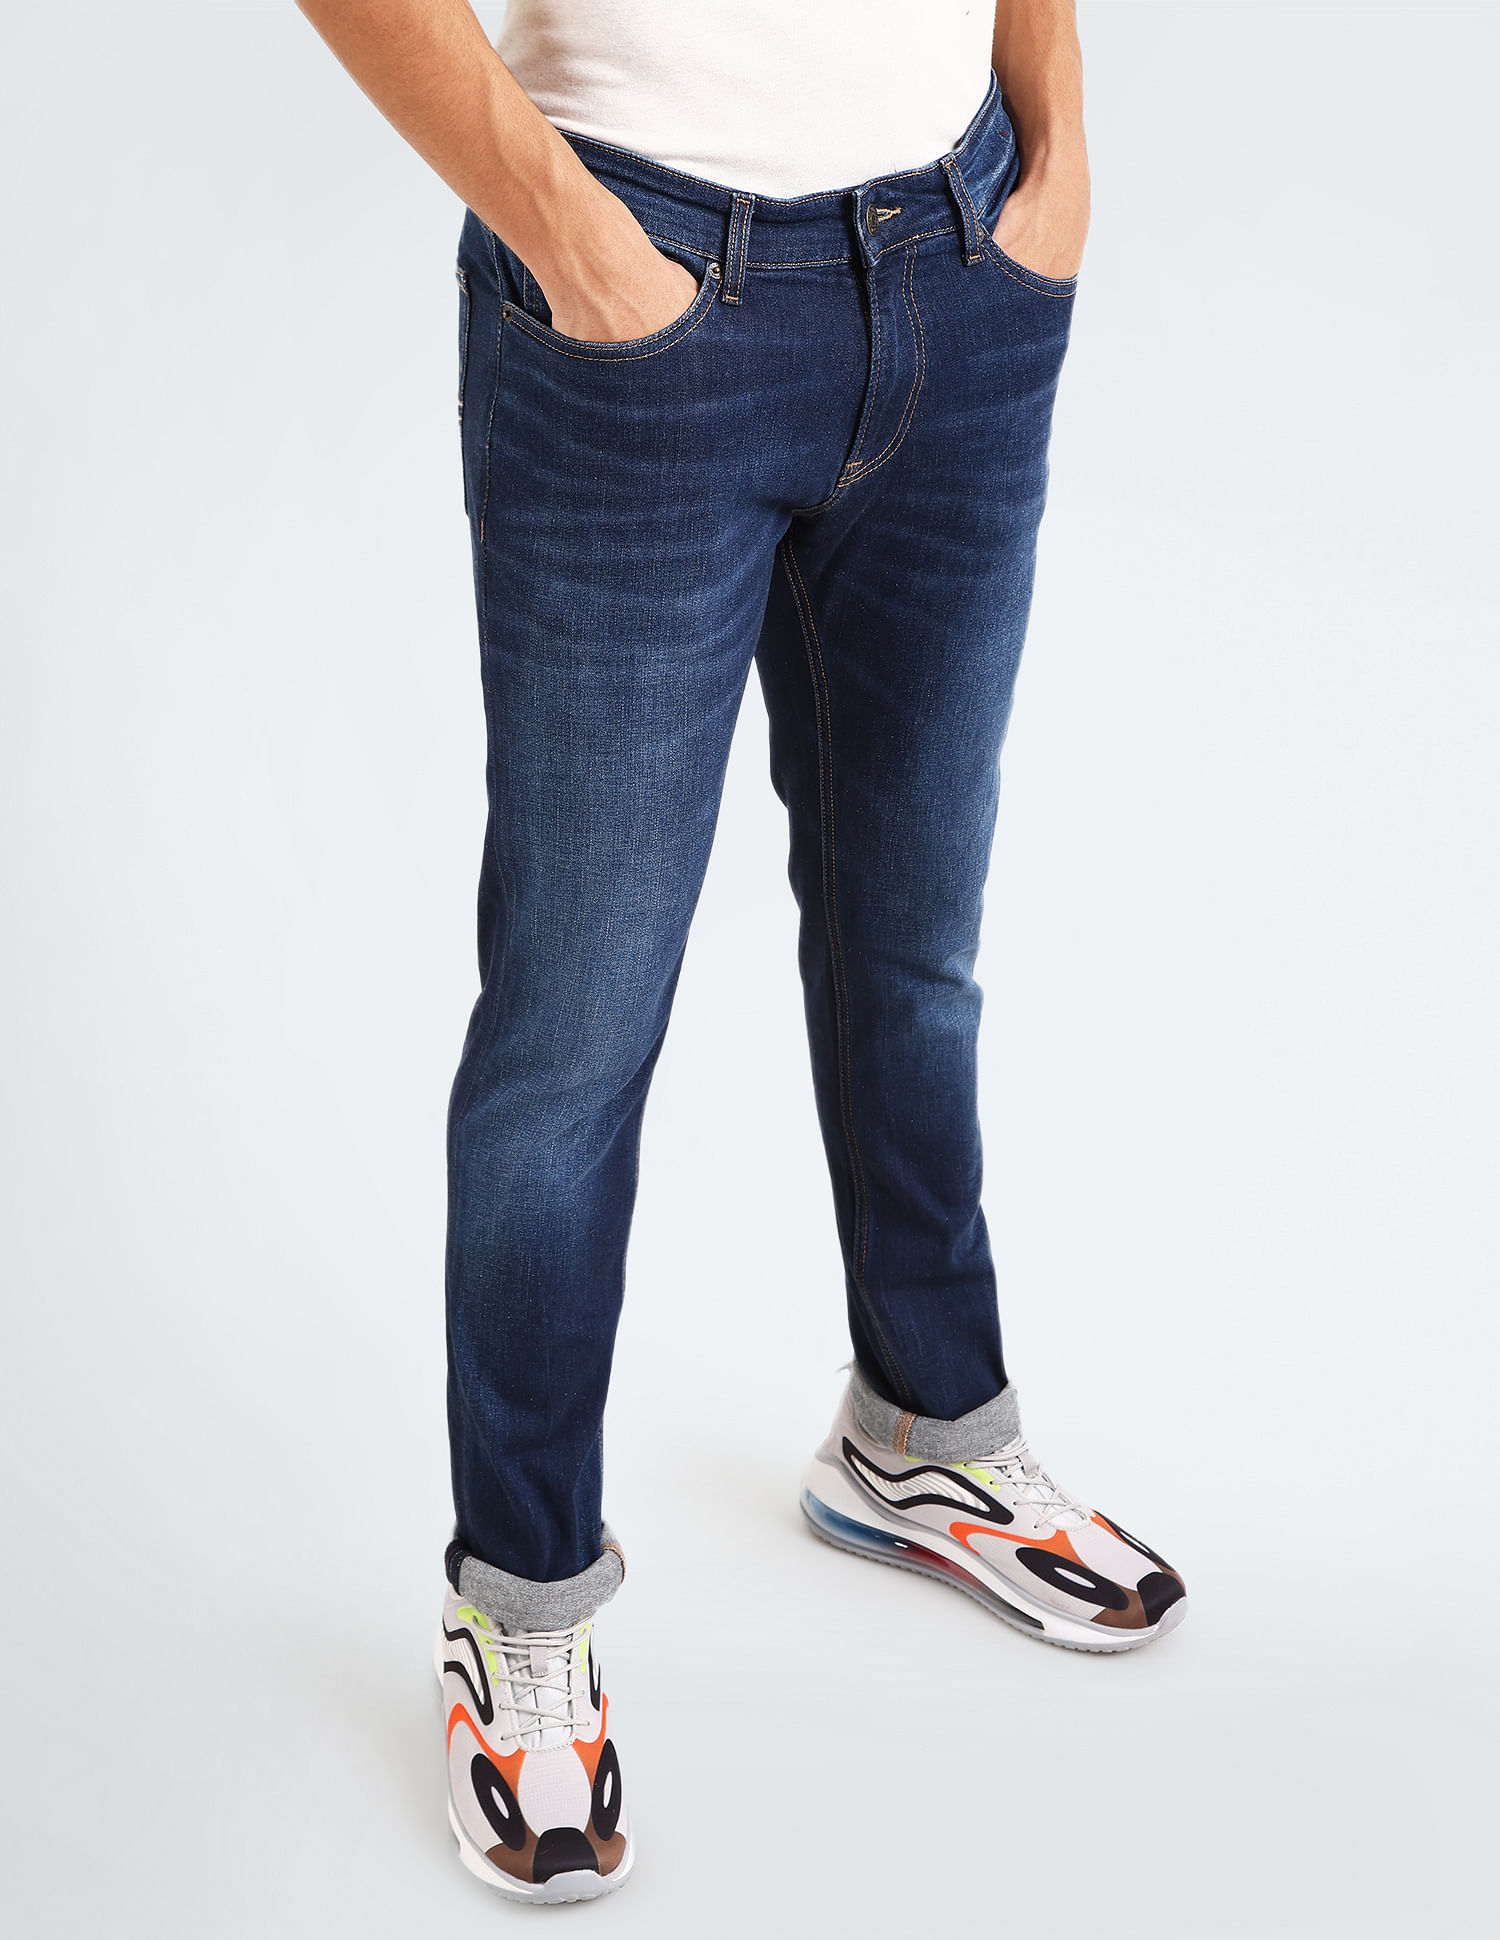 Hilfiger Buy Recycled Jeans Slim Tommy Tapered Cotton Scanton